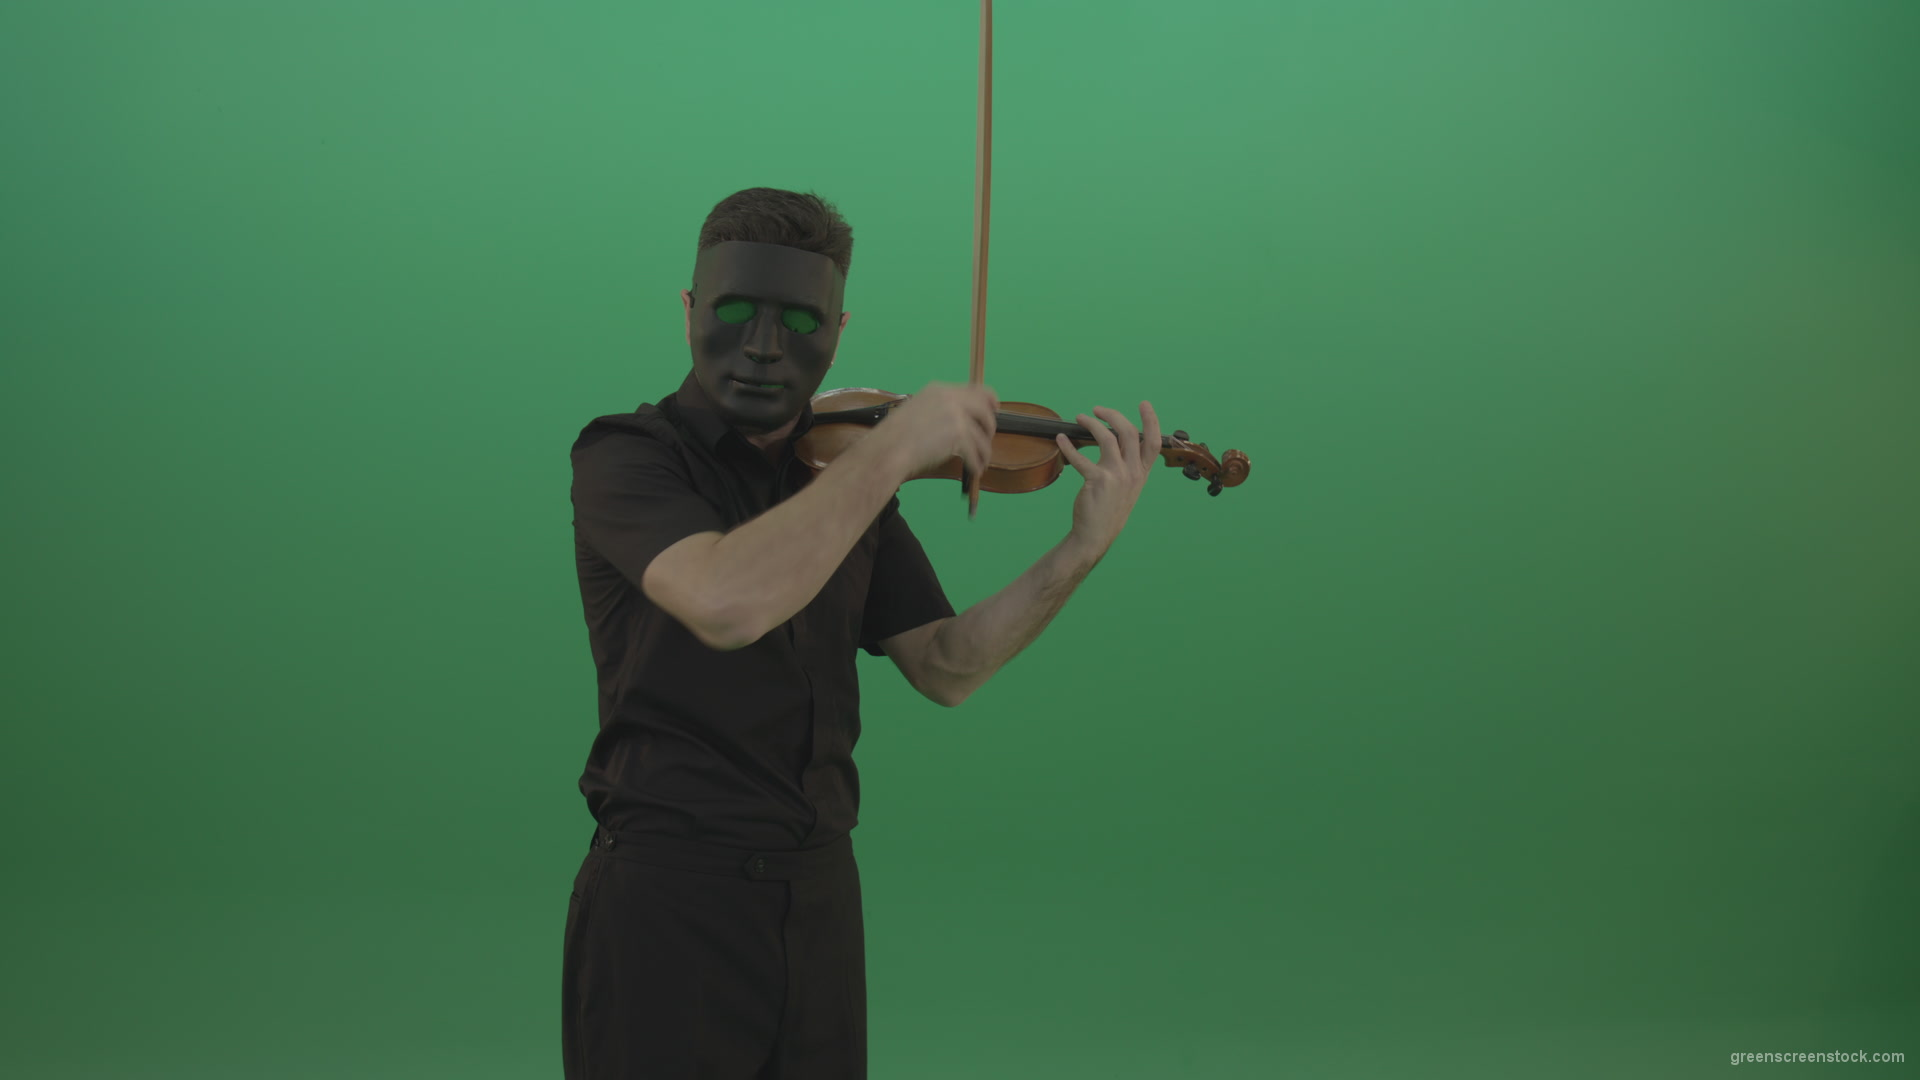 Man-in-black-wear-and-mask-play-violin-fiddle-strings-gothic-dark-music-isolated-on-green-screen_007 Green Screen Stock